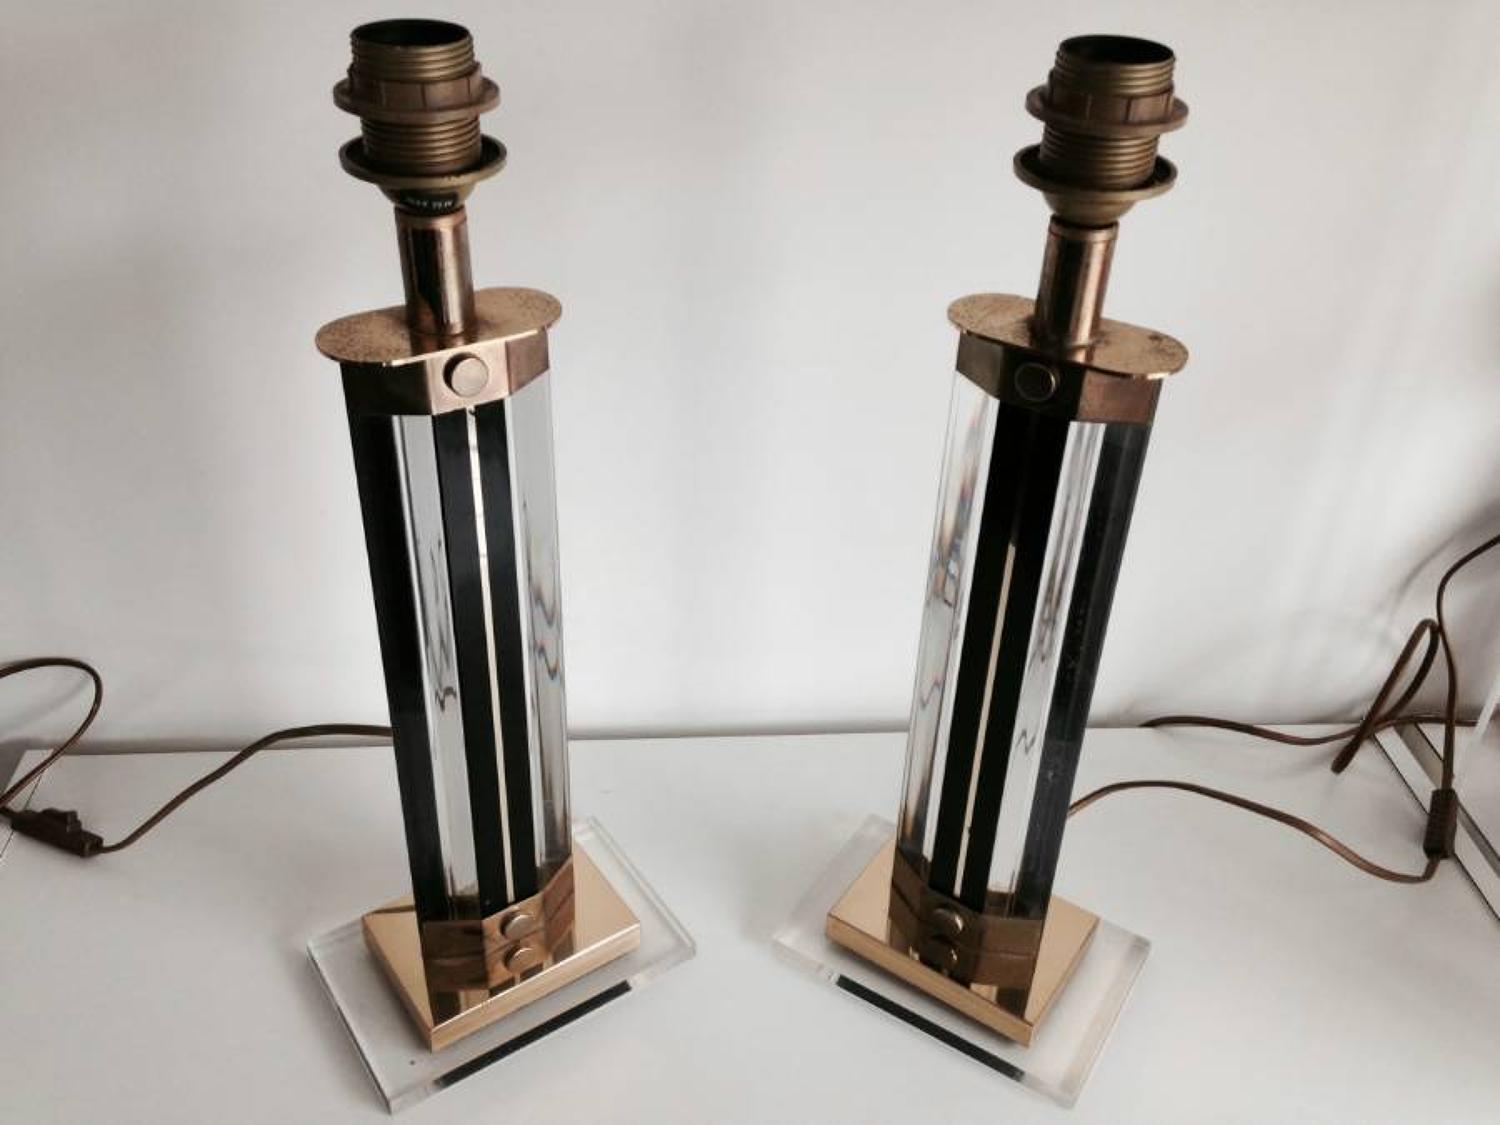 A pair of lucite and brass table lamps